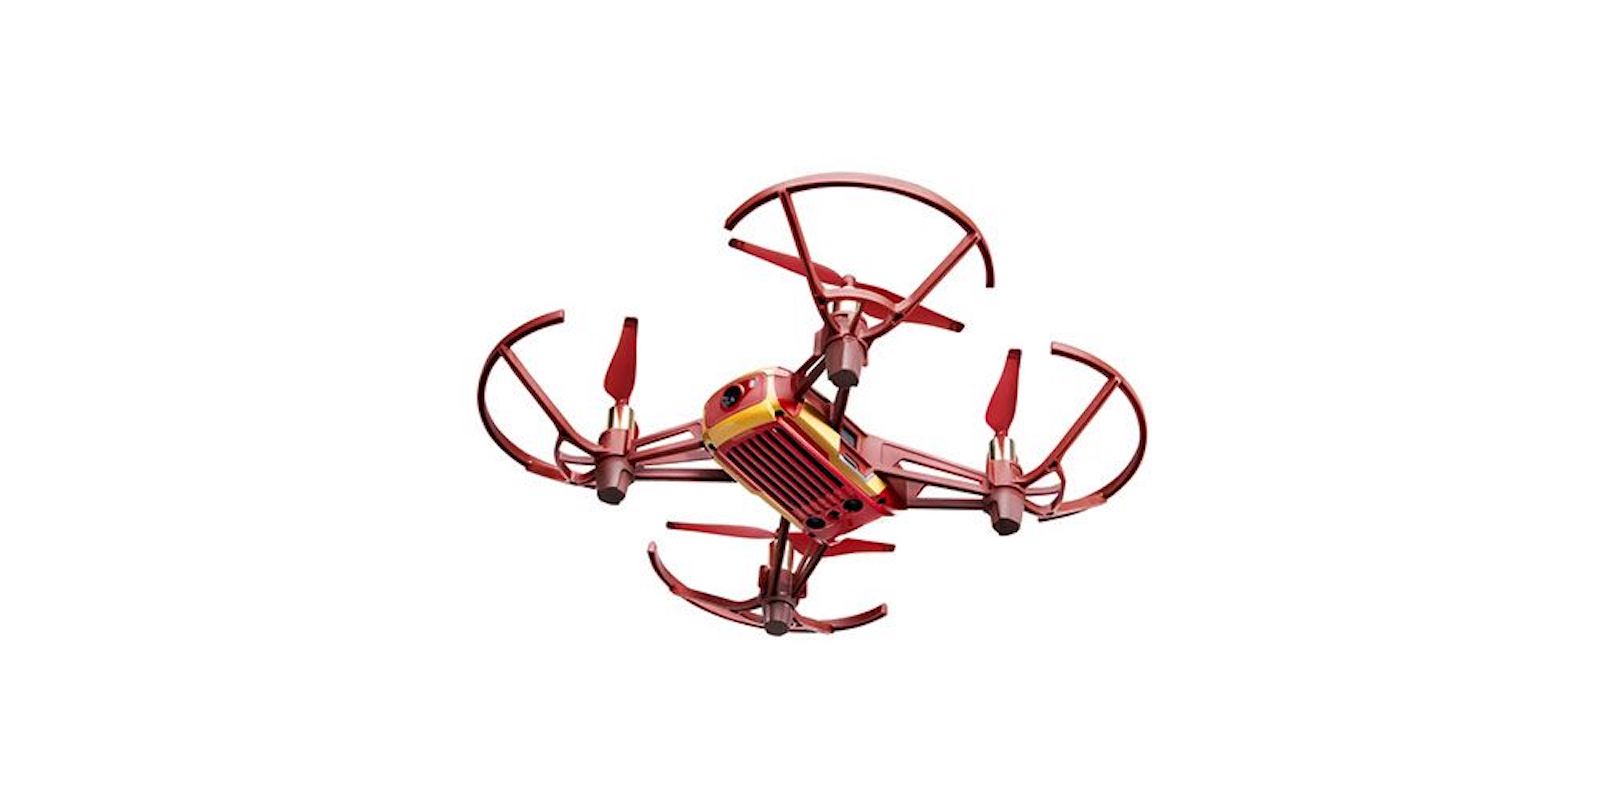 Ryze Tello Iron Man Edition drone adds immersive aerial missions, coding opportunities, and a slick paint job